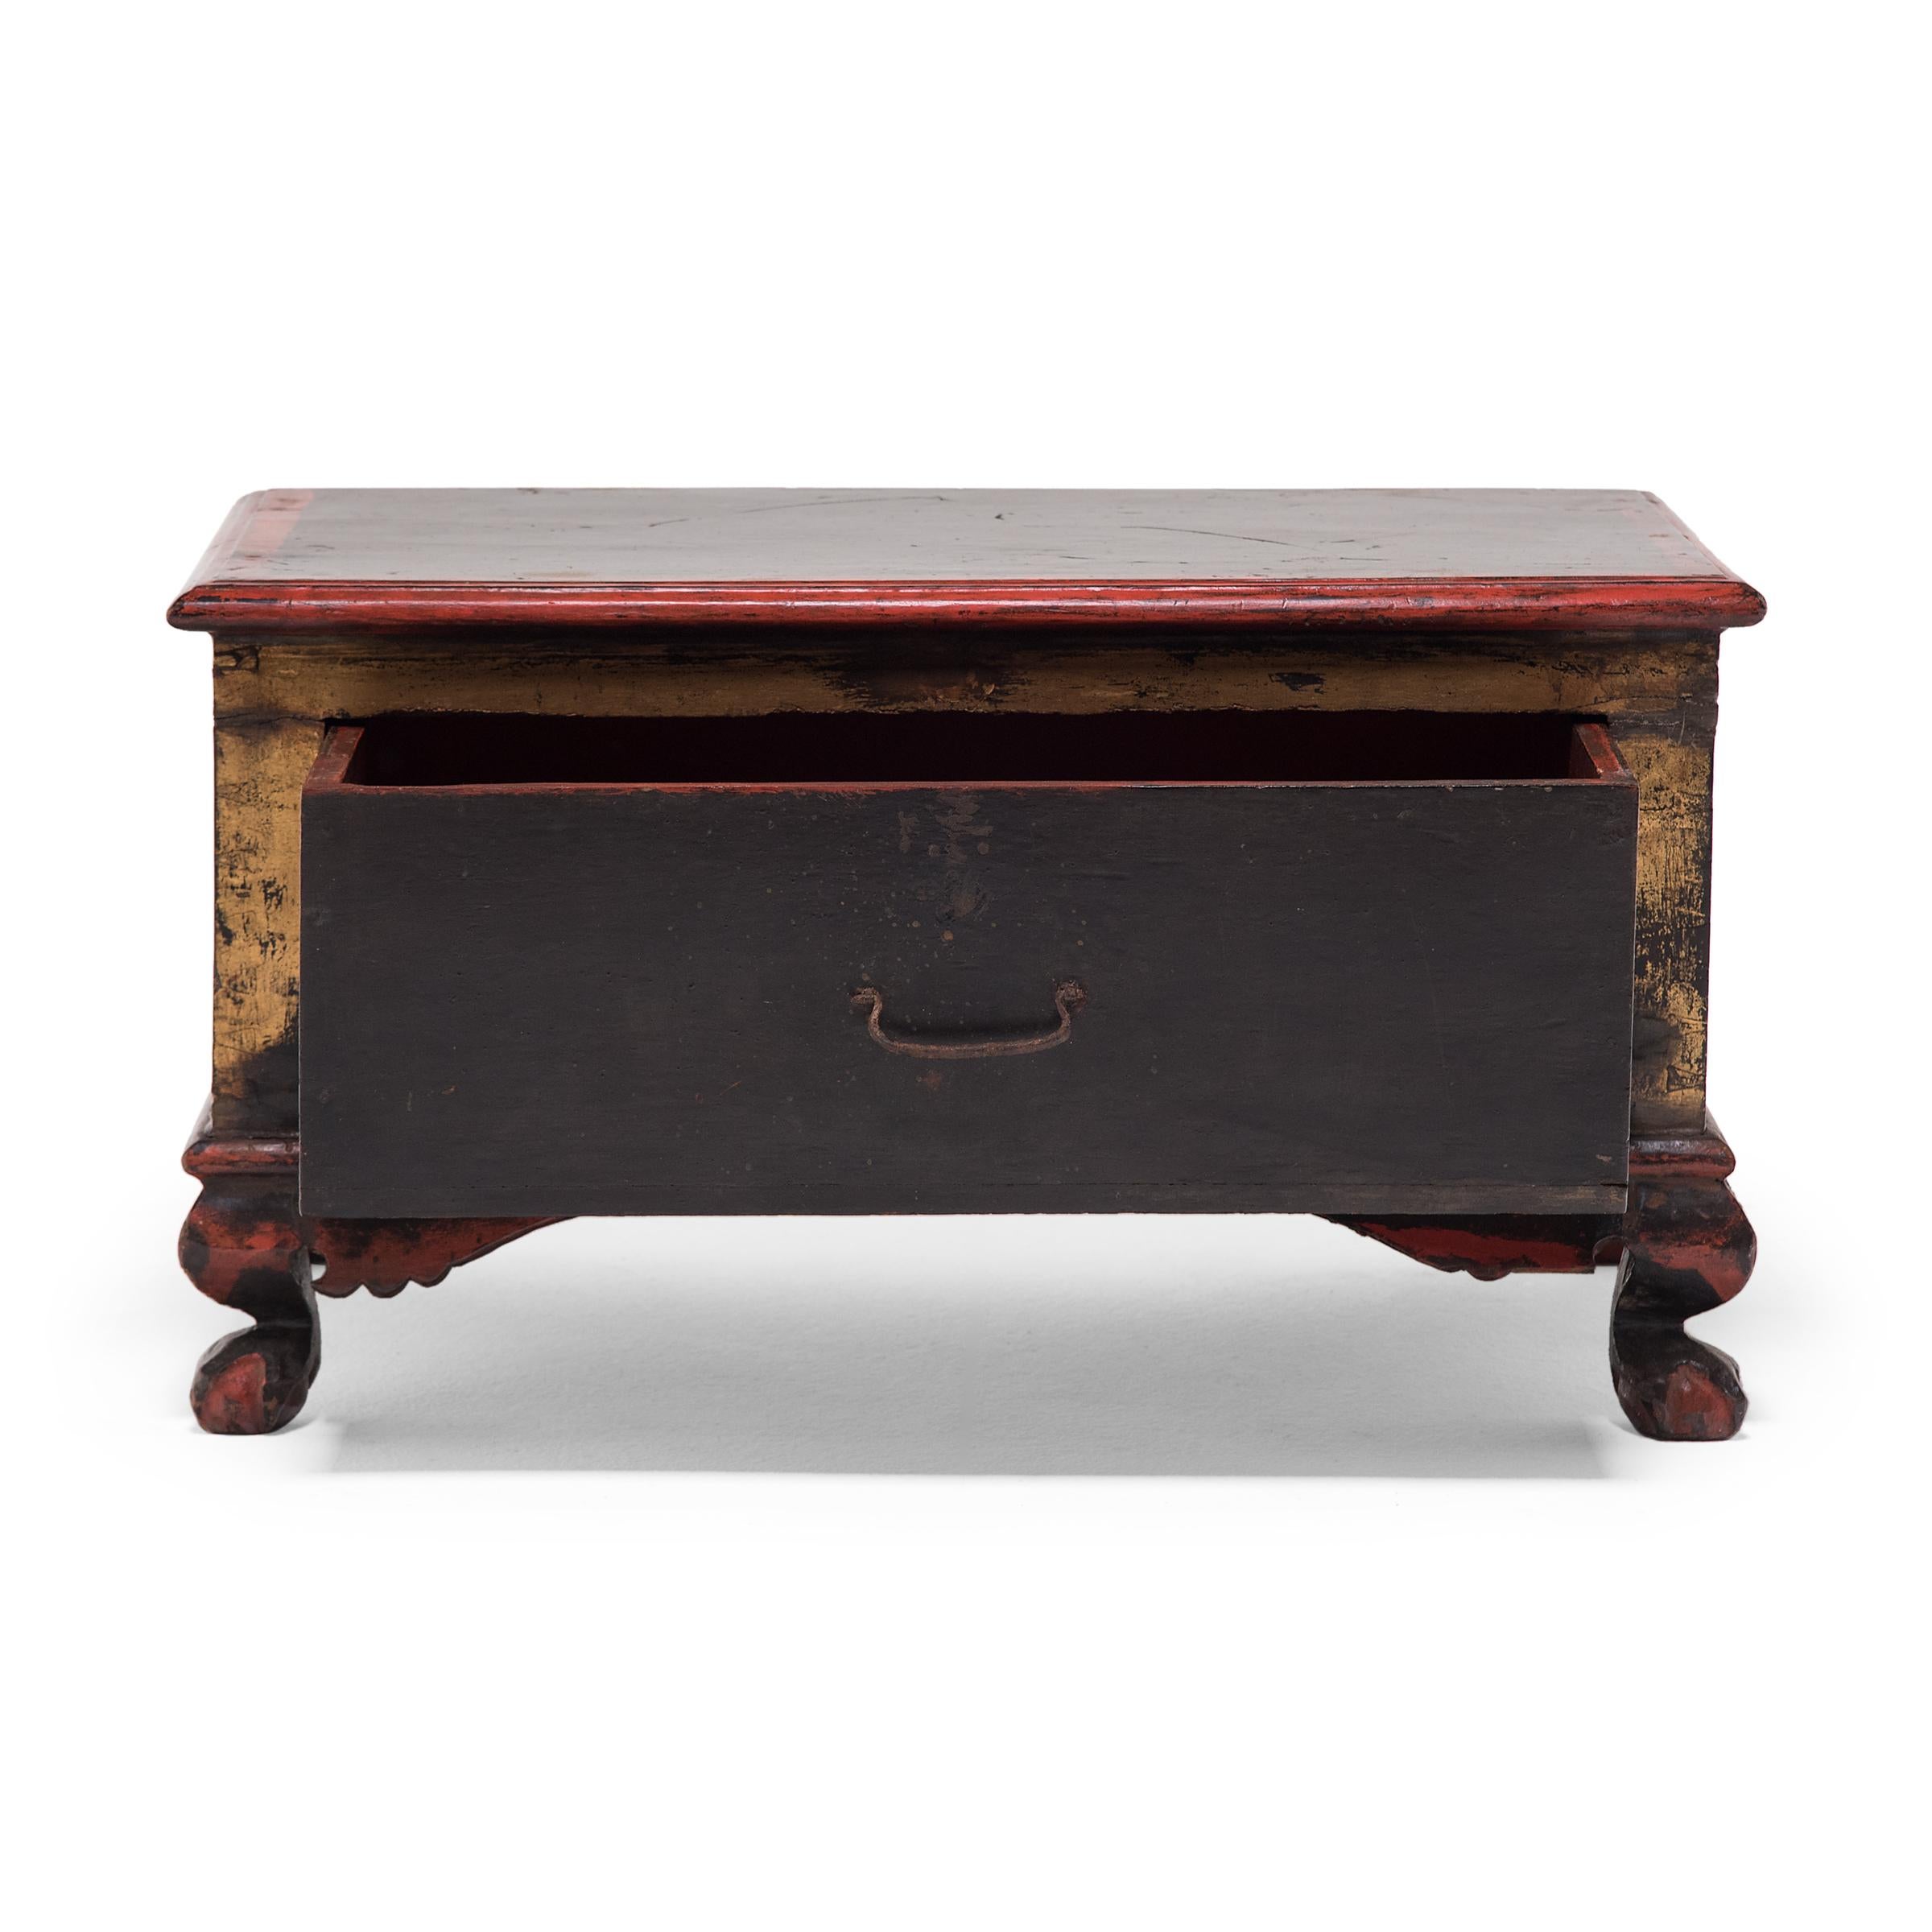 Lacquer Chinese Red and Gold Shrine Chest, c. 1850 For Sale